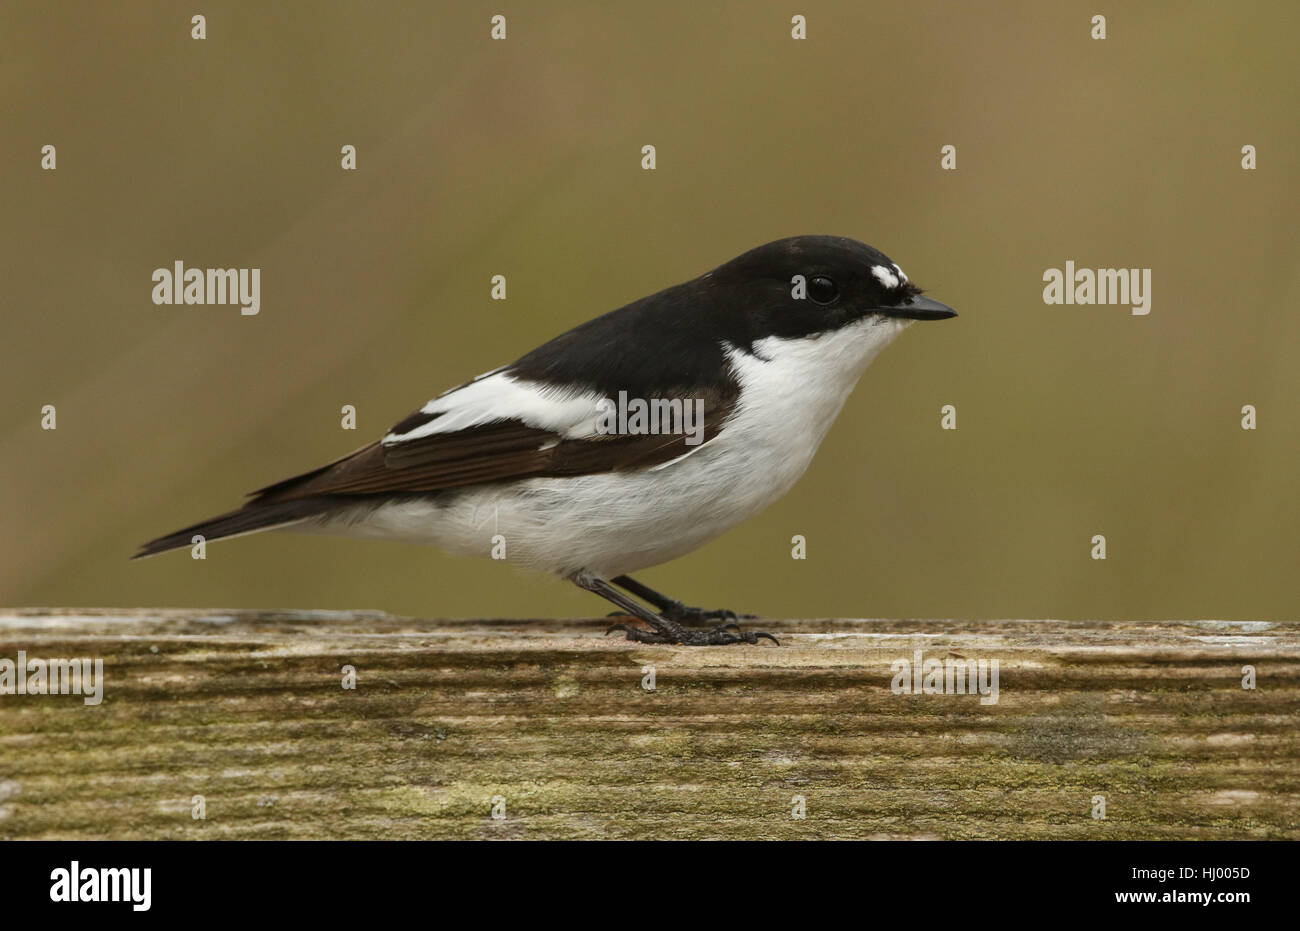 A rare male Pied Flycatchers (Ficedula hypoleuca) perched on a wooden fence. Stock Photo